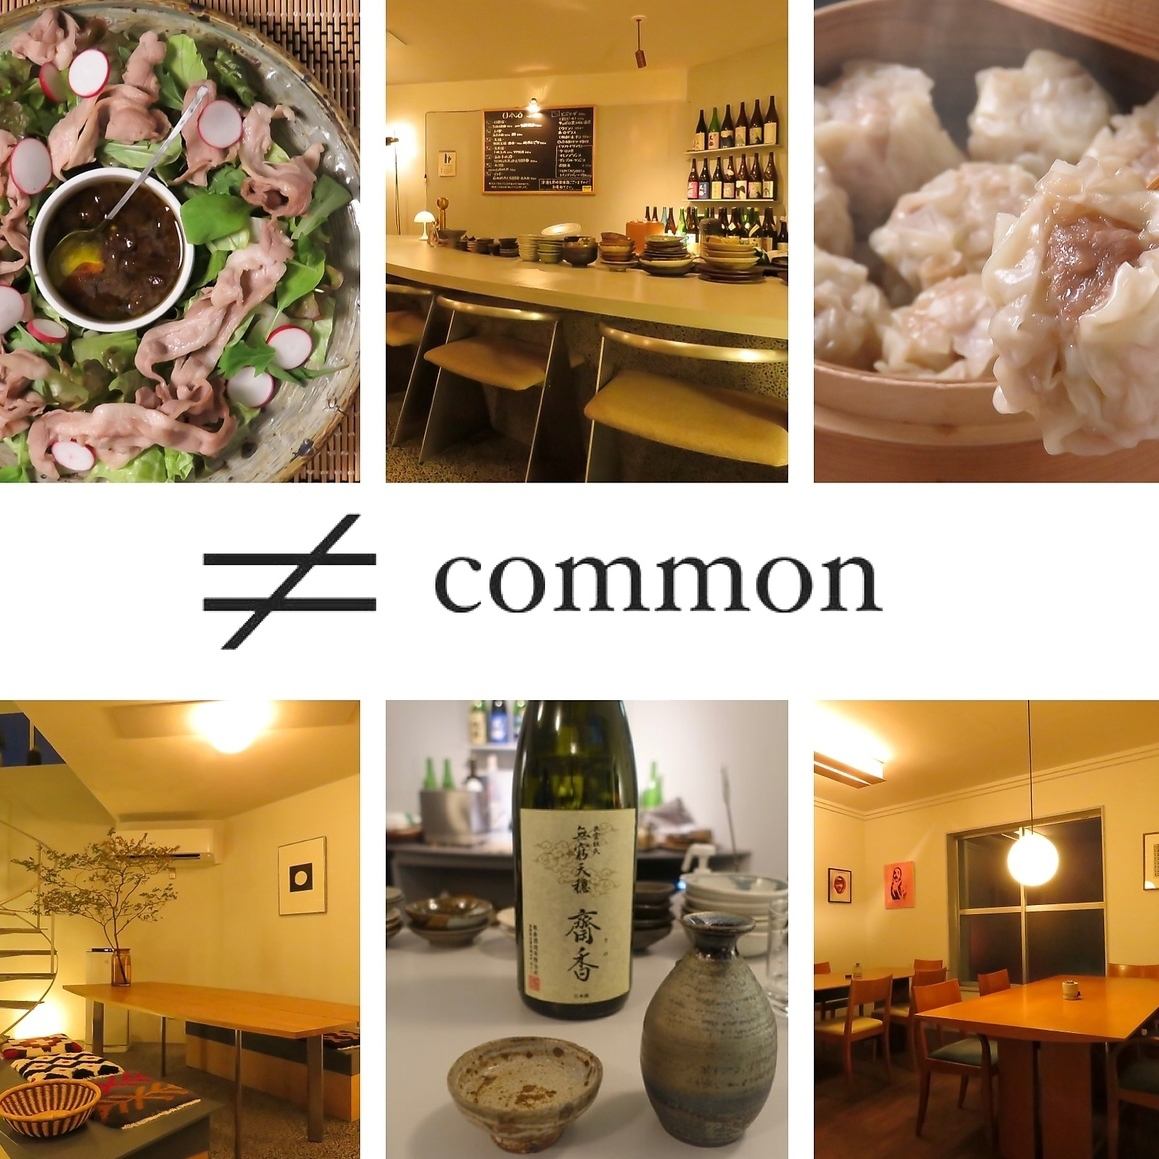 Relaxed interior and stylish space! Offers natural cuisine, warm pure rice sake, and wine.